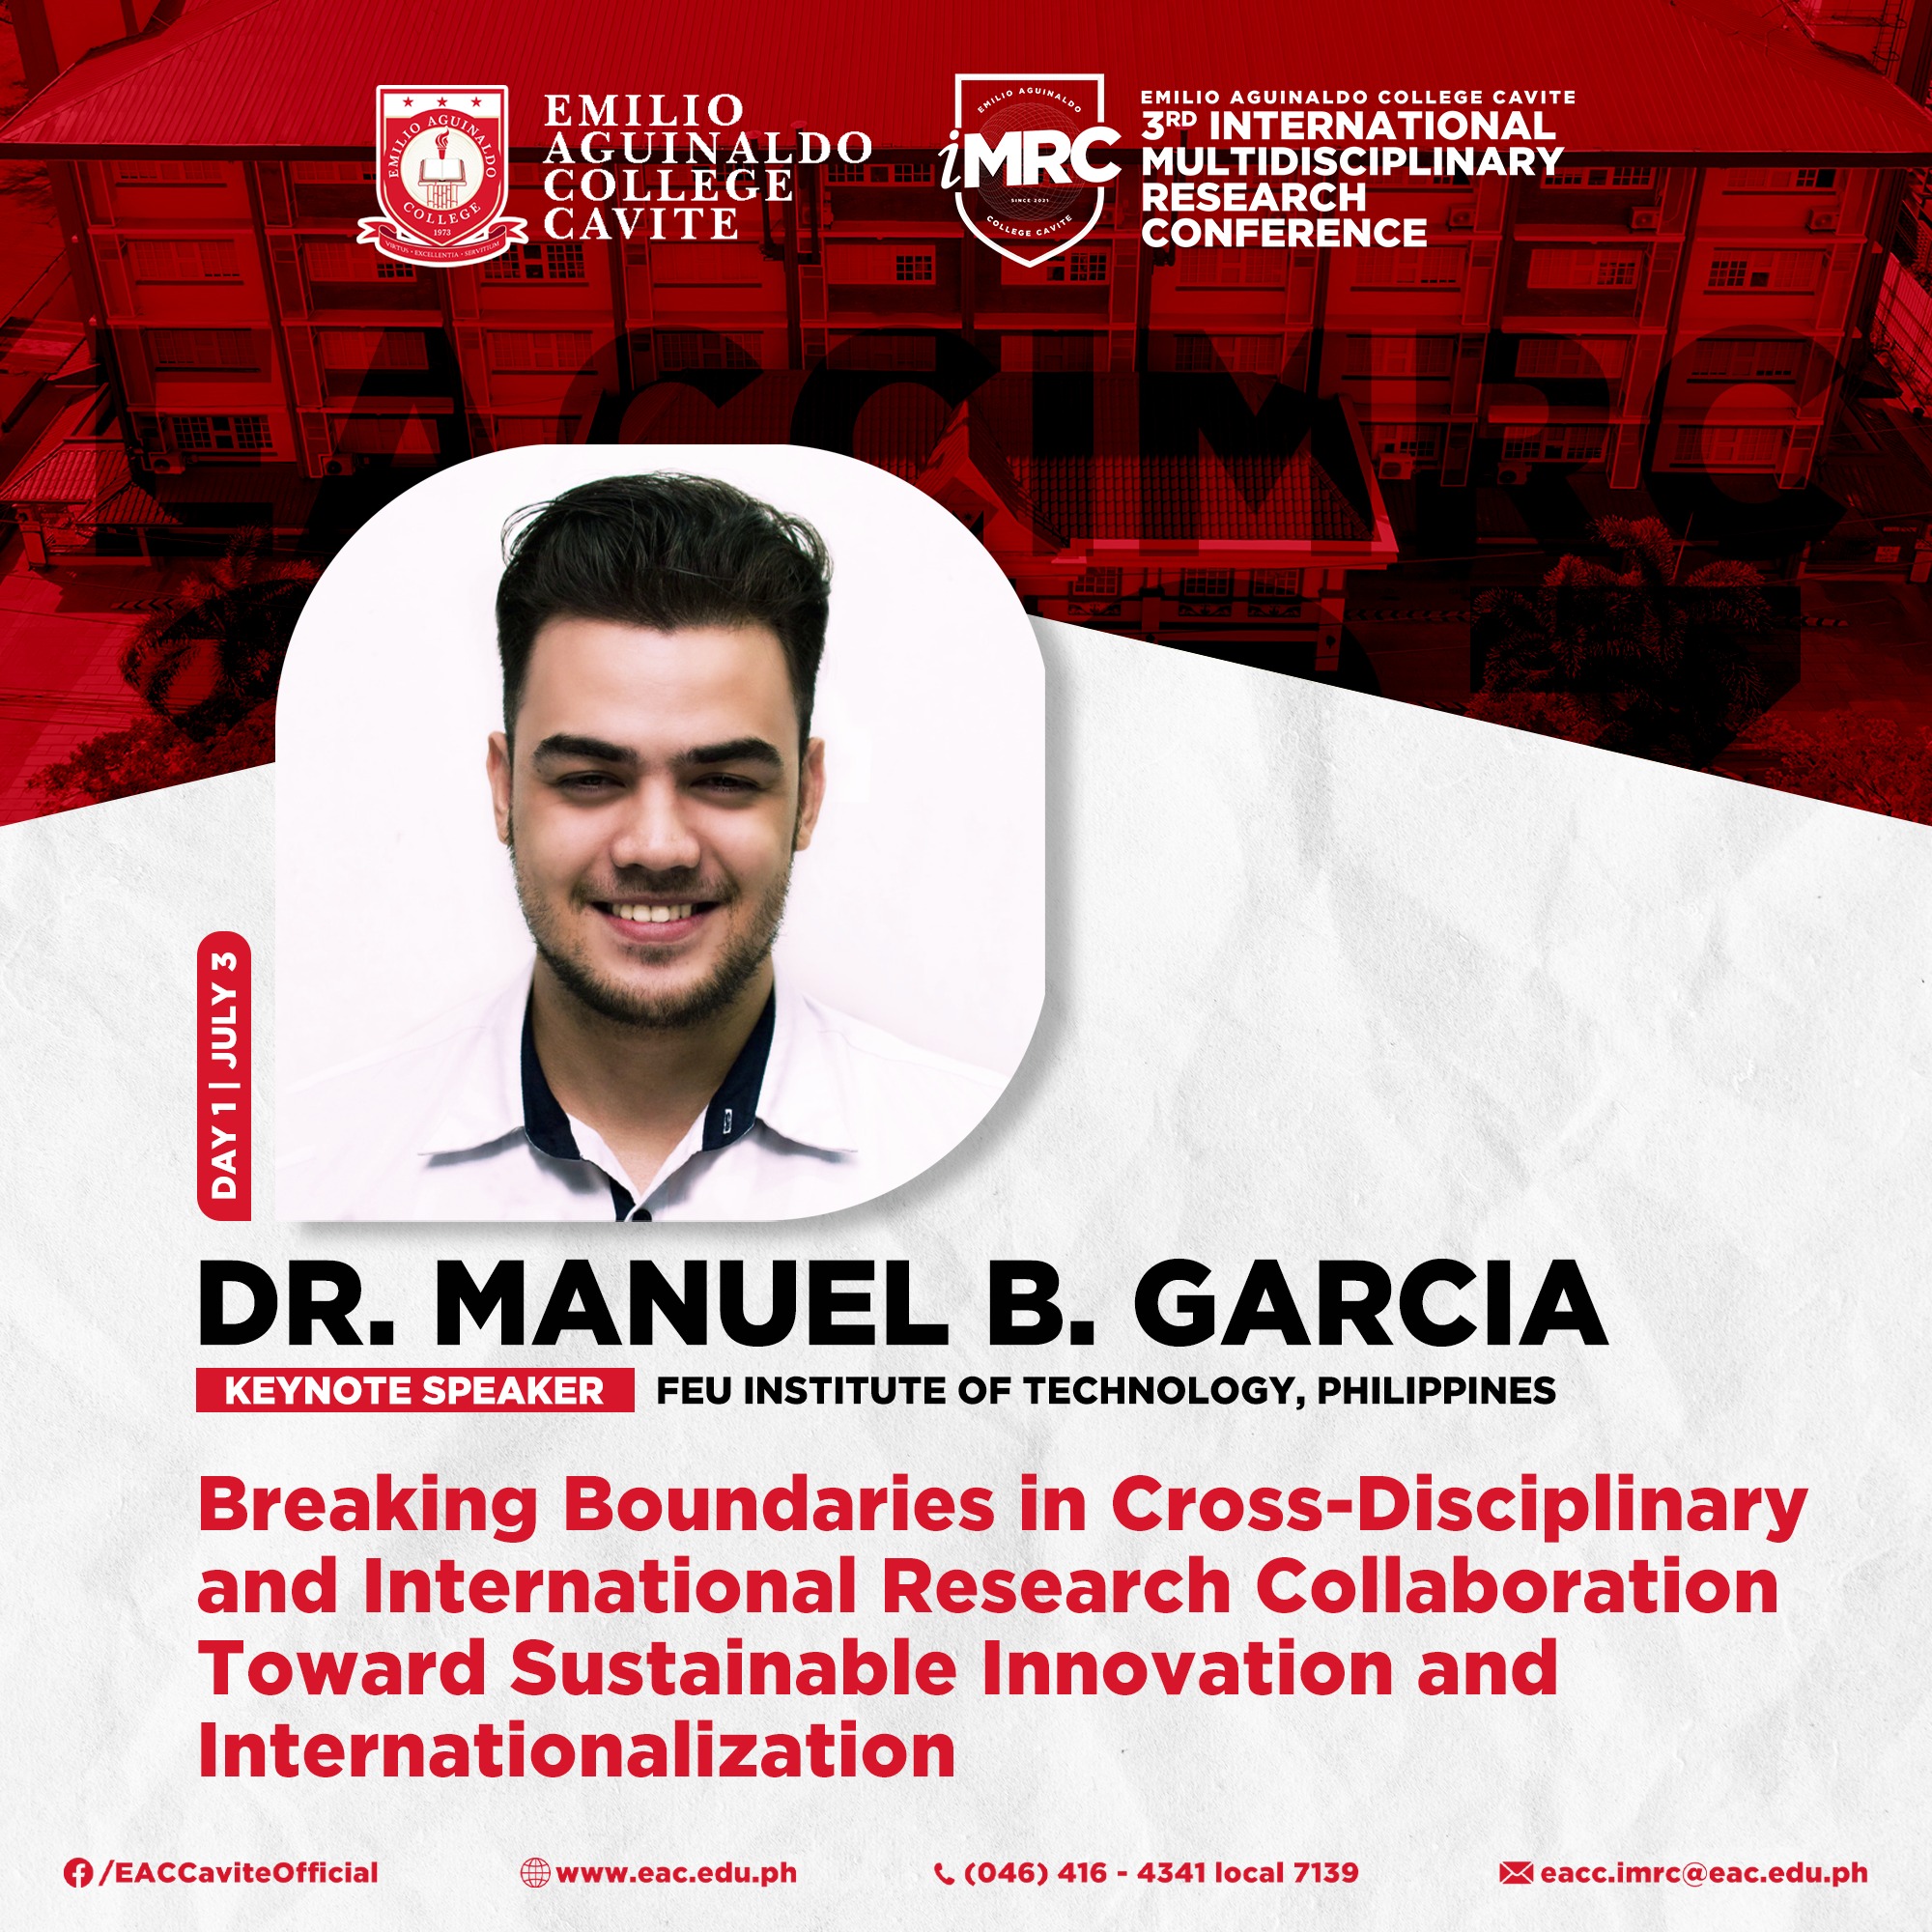 The conference committee of EACC-IMRC 2023 announced Dr. Manuel B. Garcia as this year's keynote speaker